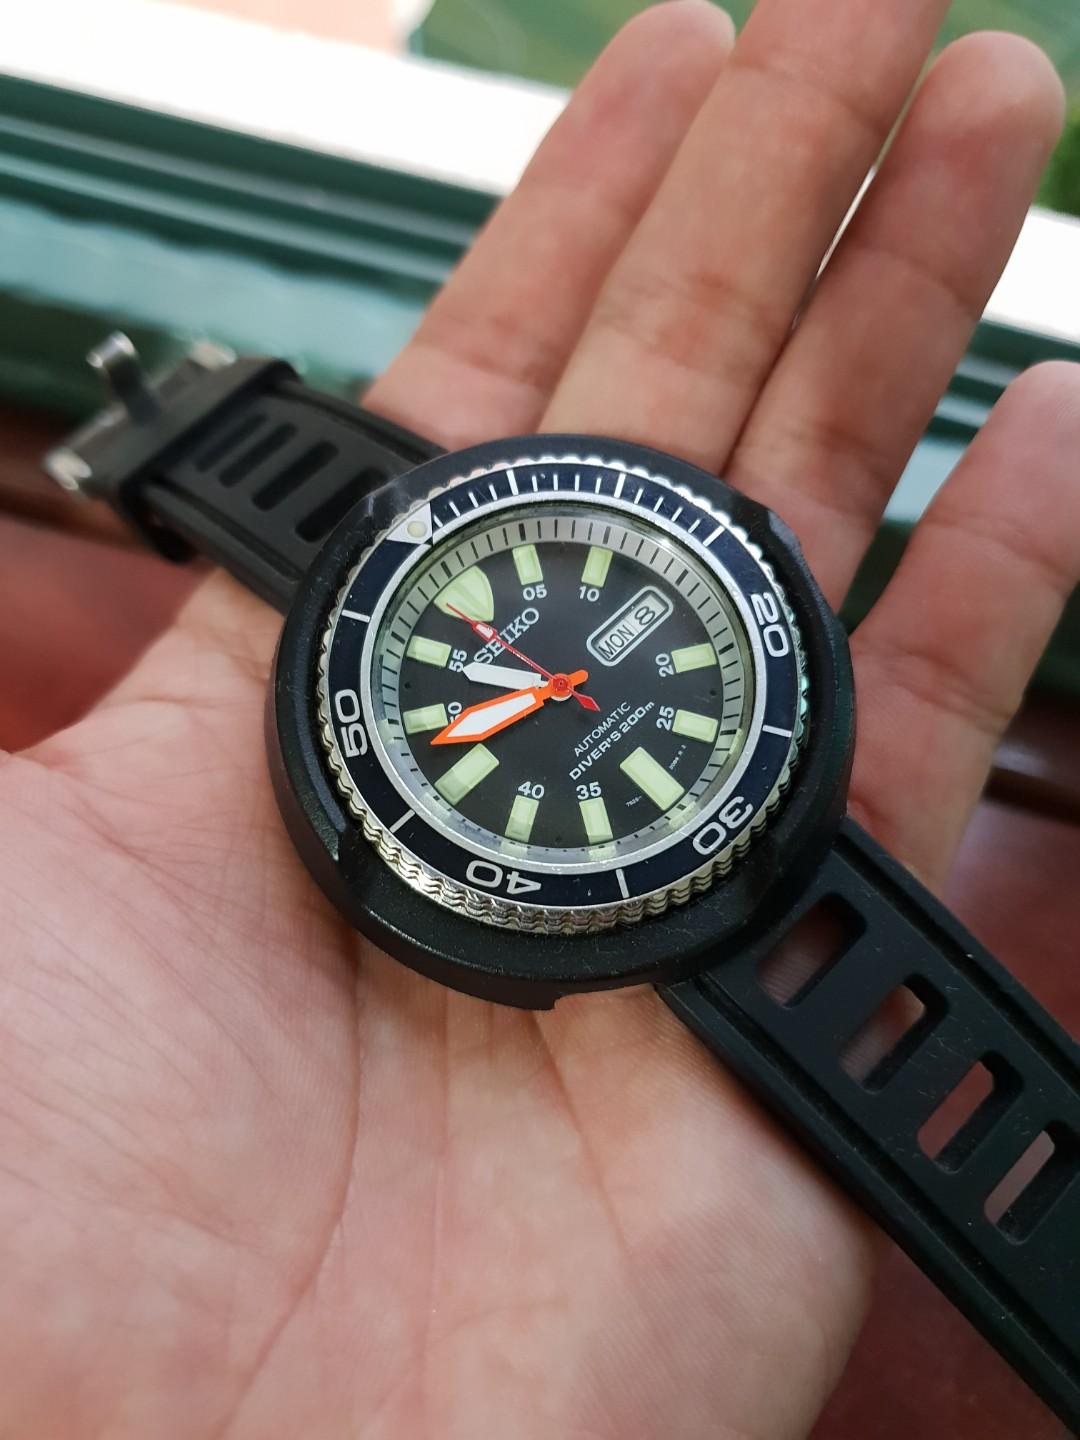 REDUCED] Seiko SKX007 Tuna Mod (Priced to clear), Men's Fashion, Watches &  Accessories, Watches on Carousell